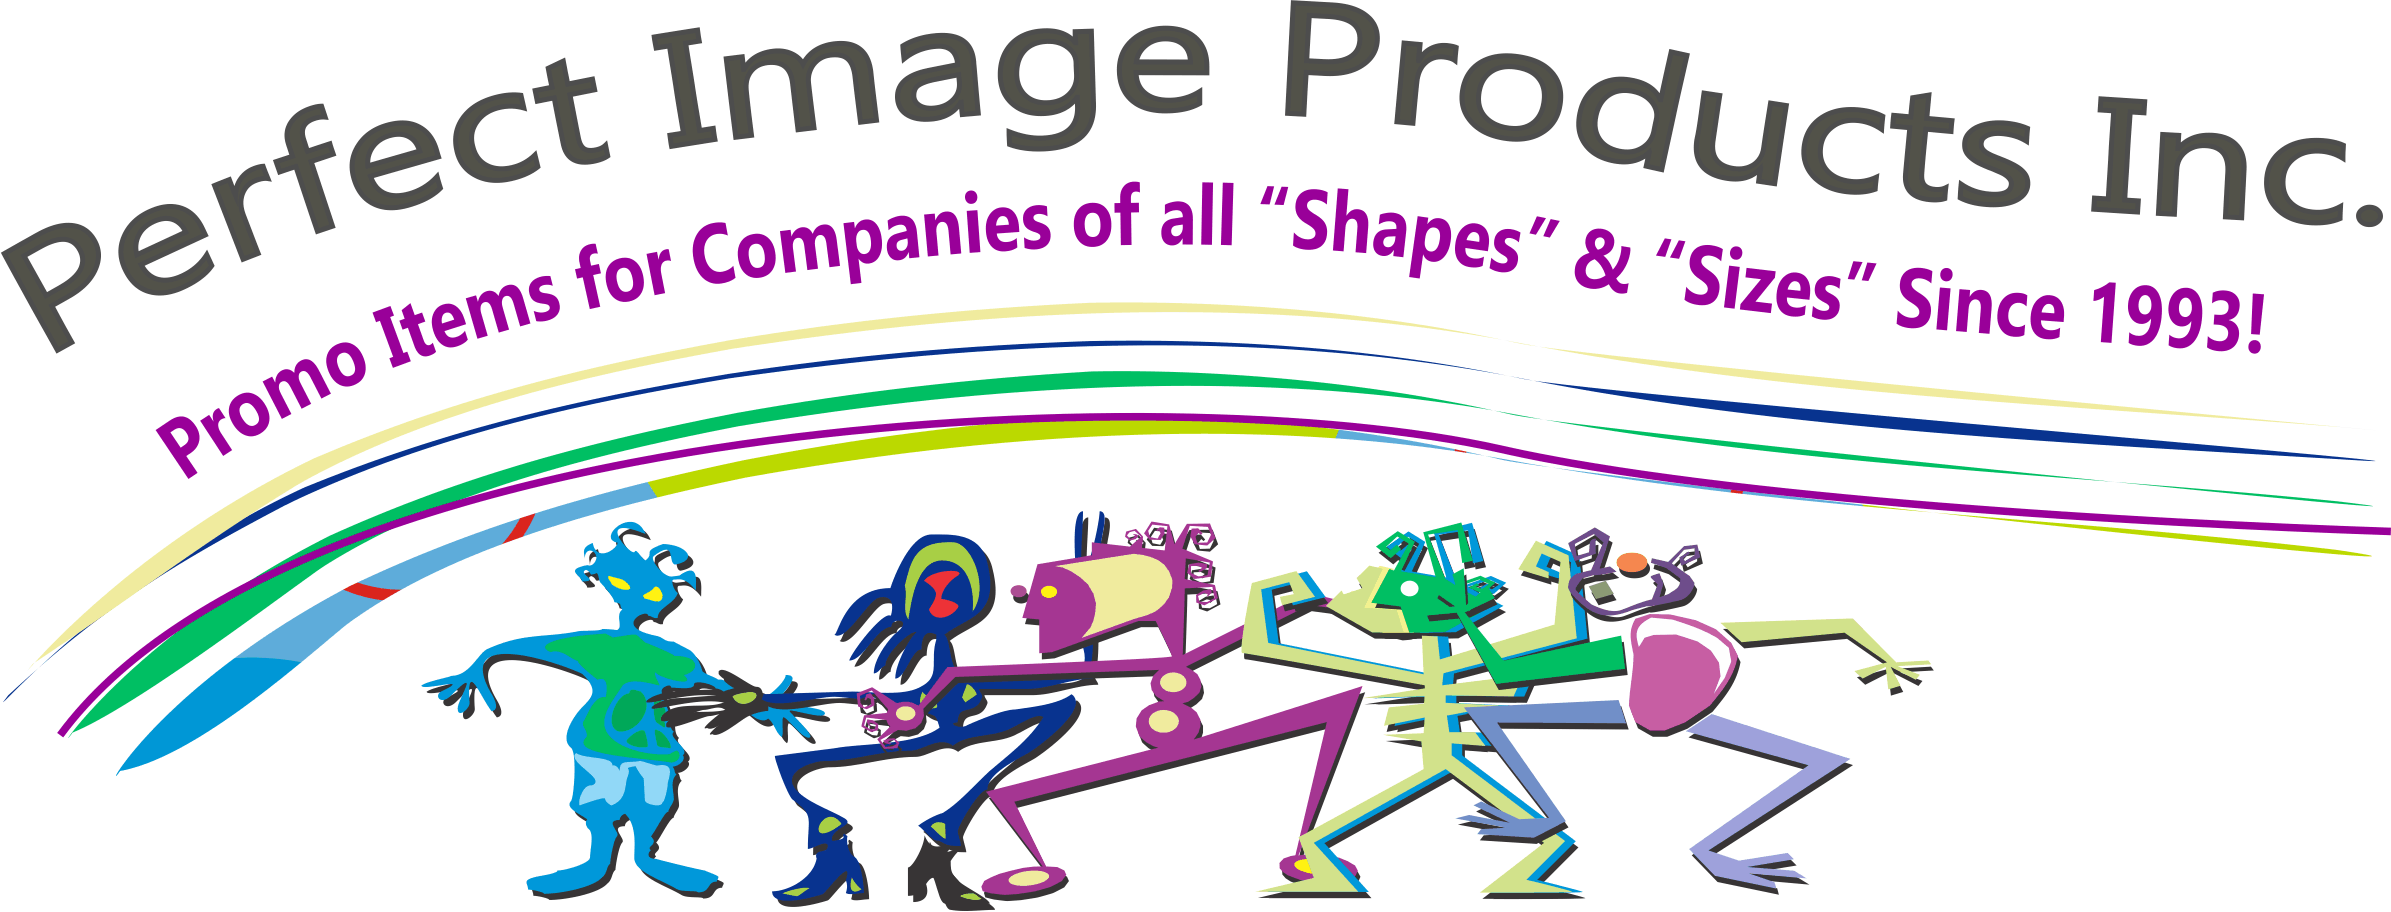 Perfect Image Products Inc.'s Logo